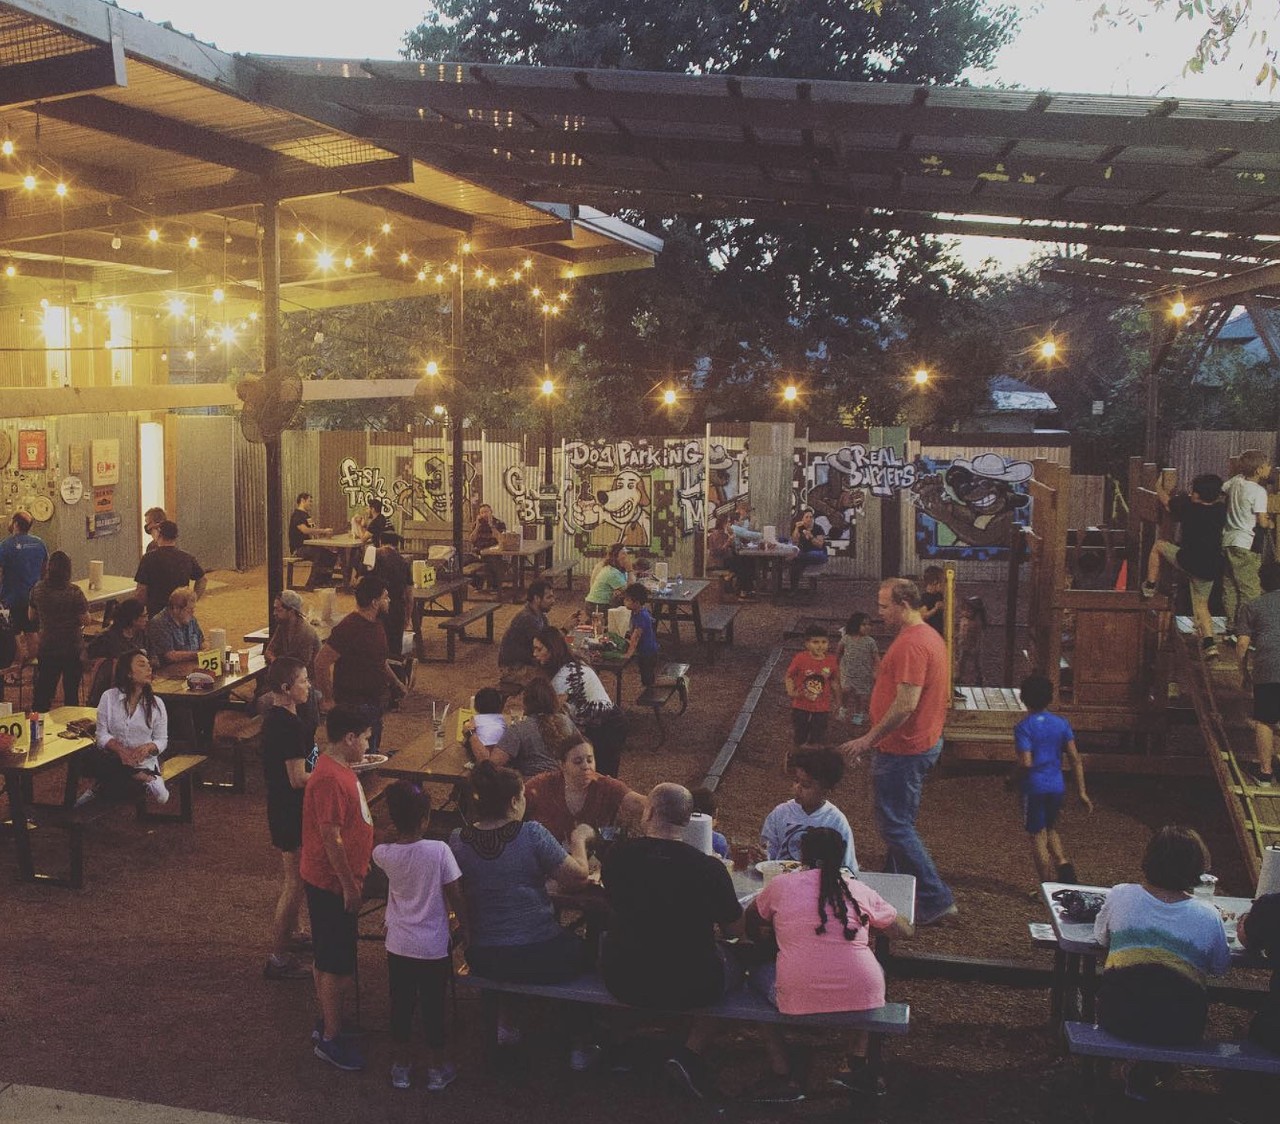 The Cove 
606 W Cypress St, (210) 227-2683, thecove.us 
The Cove has long been an outdoor haven for San Antonians, and for good reason. Its spacious patio accommodates those looking to enjoy the weather, plus it has a play area with plenty of room for kids to have a blast. Be sure to check out the Texas bar, which offers over 40 Texas craft brews.
Photo via Instagram / thecovesa